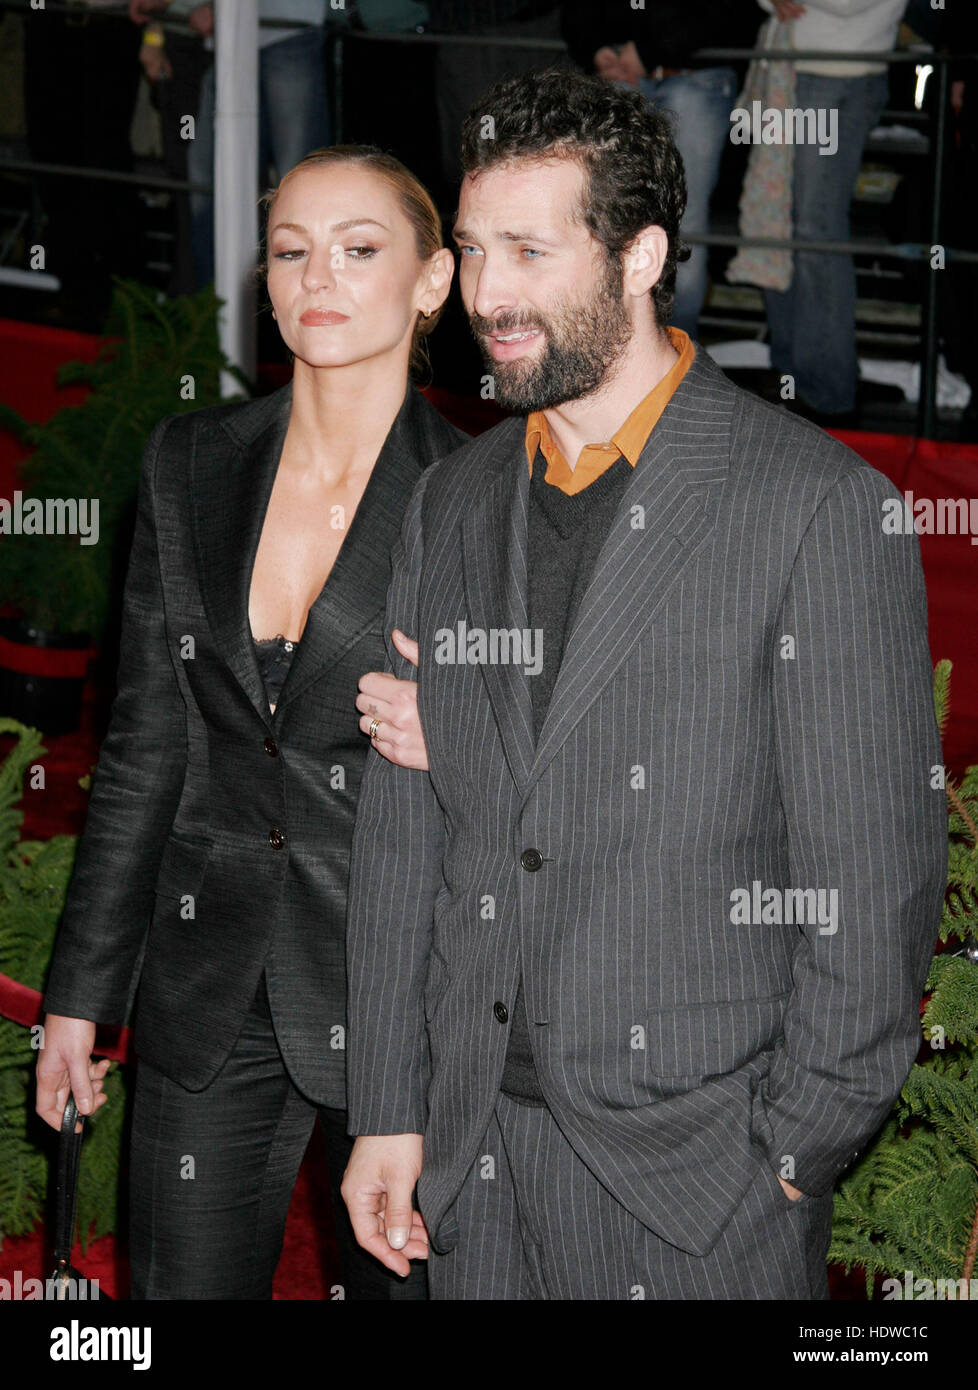 Actress Drea De Matteo and her date  arrive at the People's Choice Awards in  Pasadena, California on Sunday, 09 January, 2004. Photo credit: Francis Specker Stock Photo